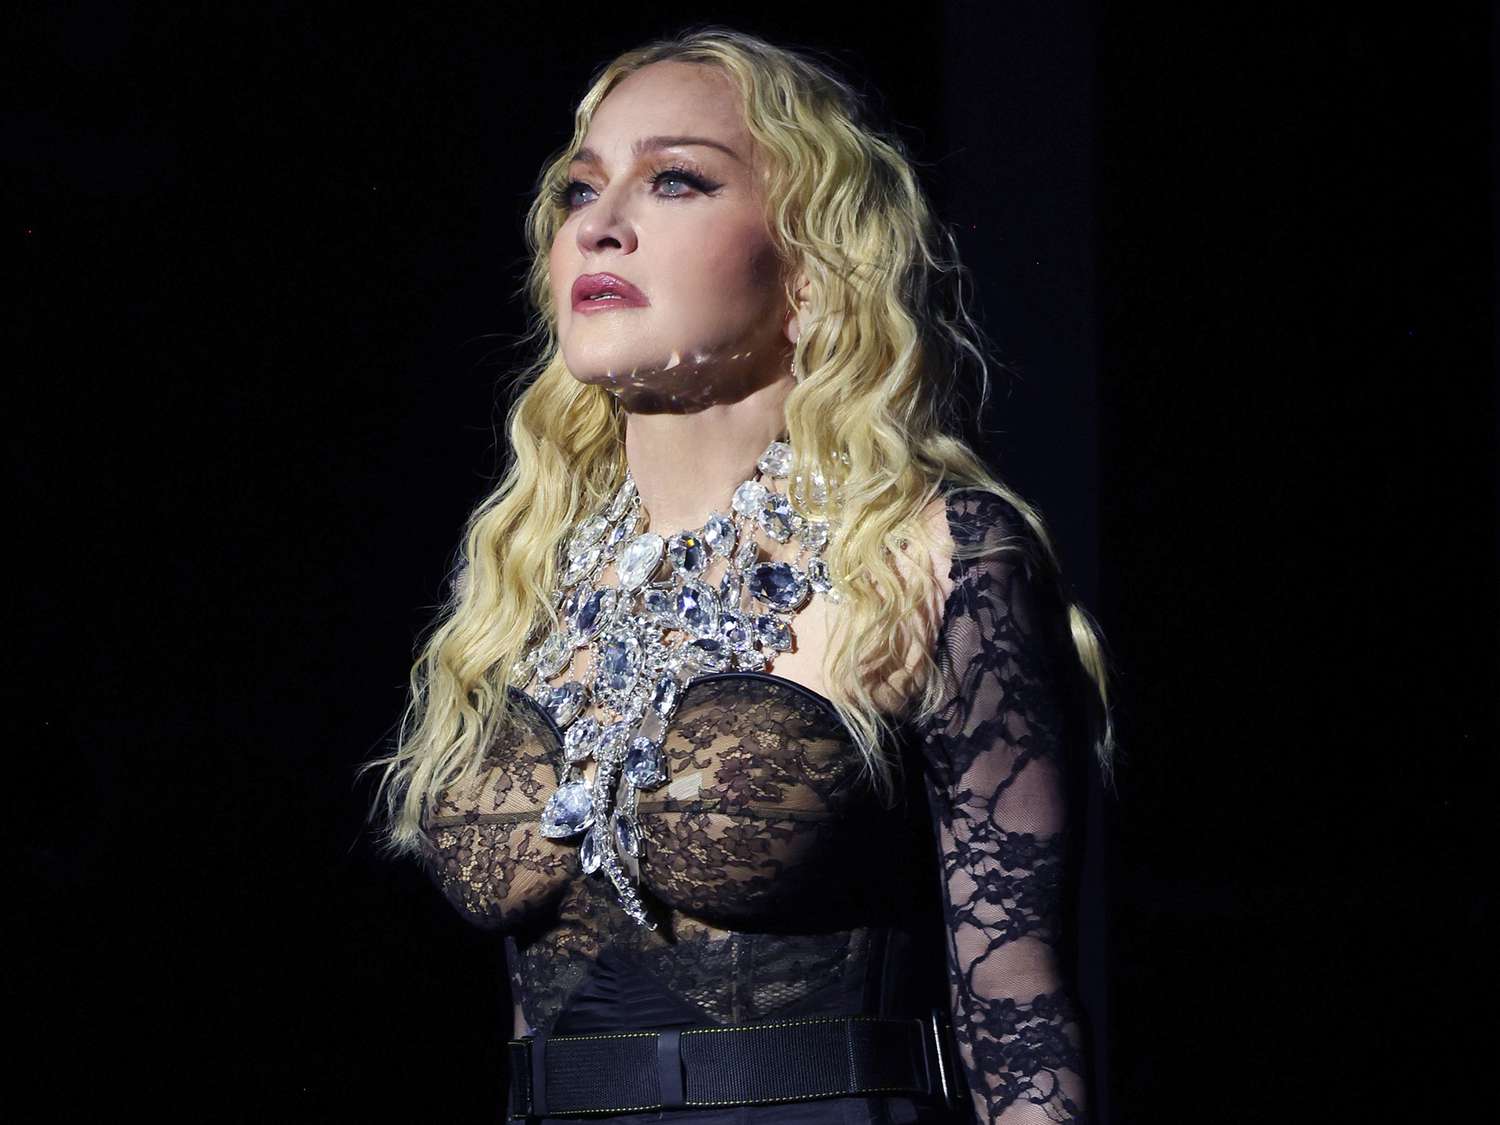 Madonna’s Lawyers Call to Dismiss Lawsuit Filed Over Concert Start Time [Video]